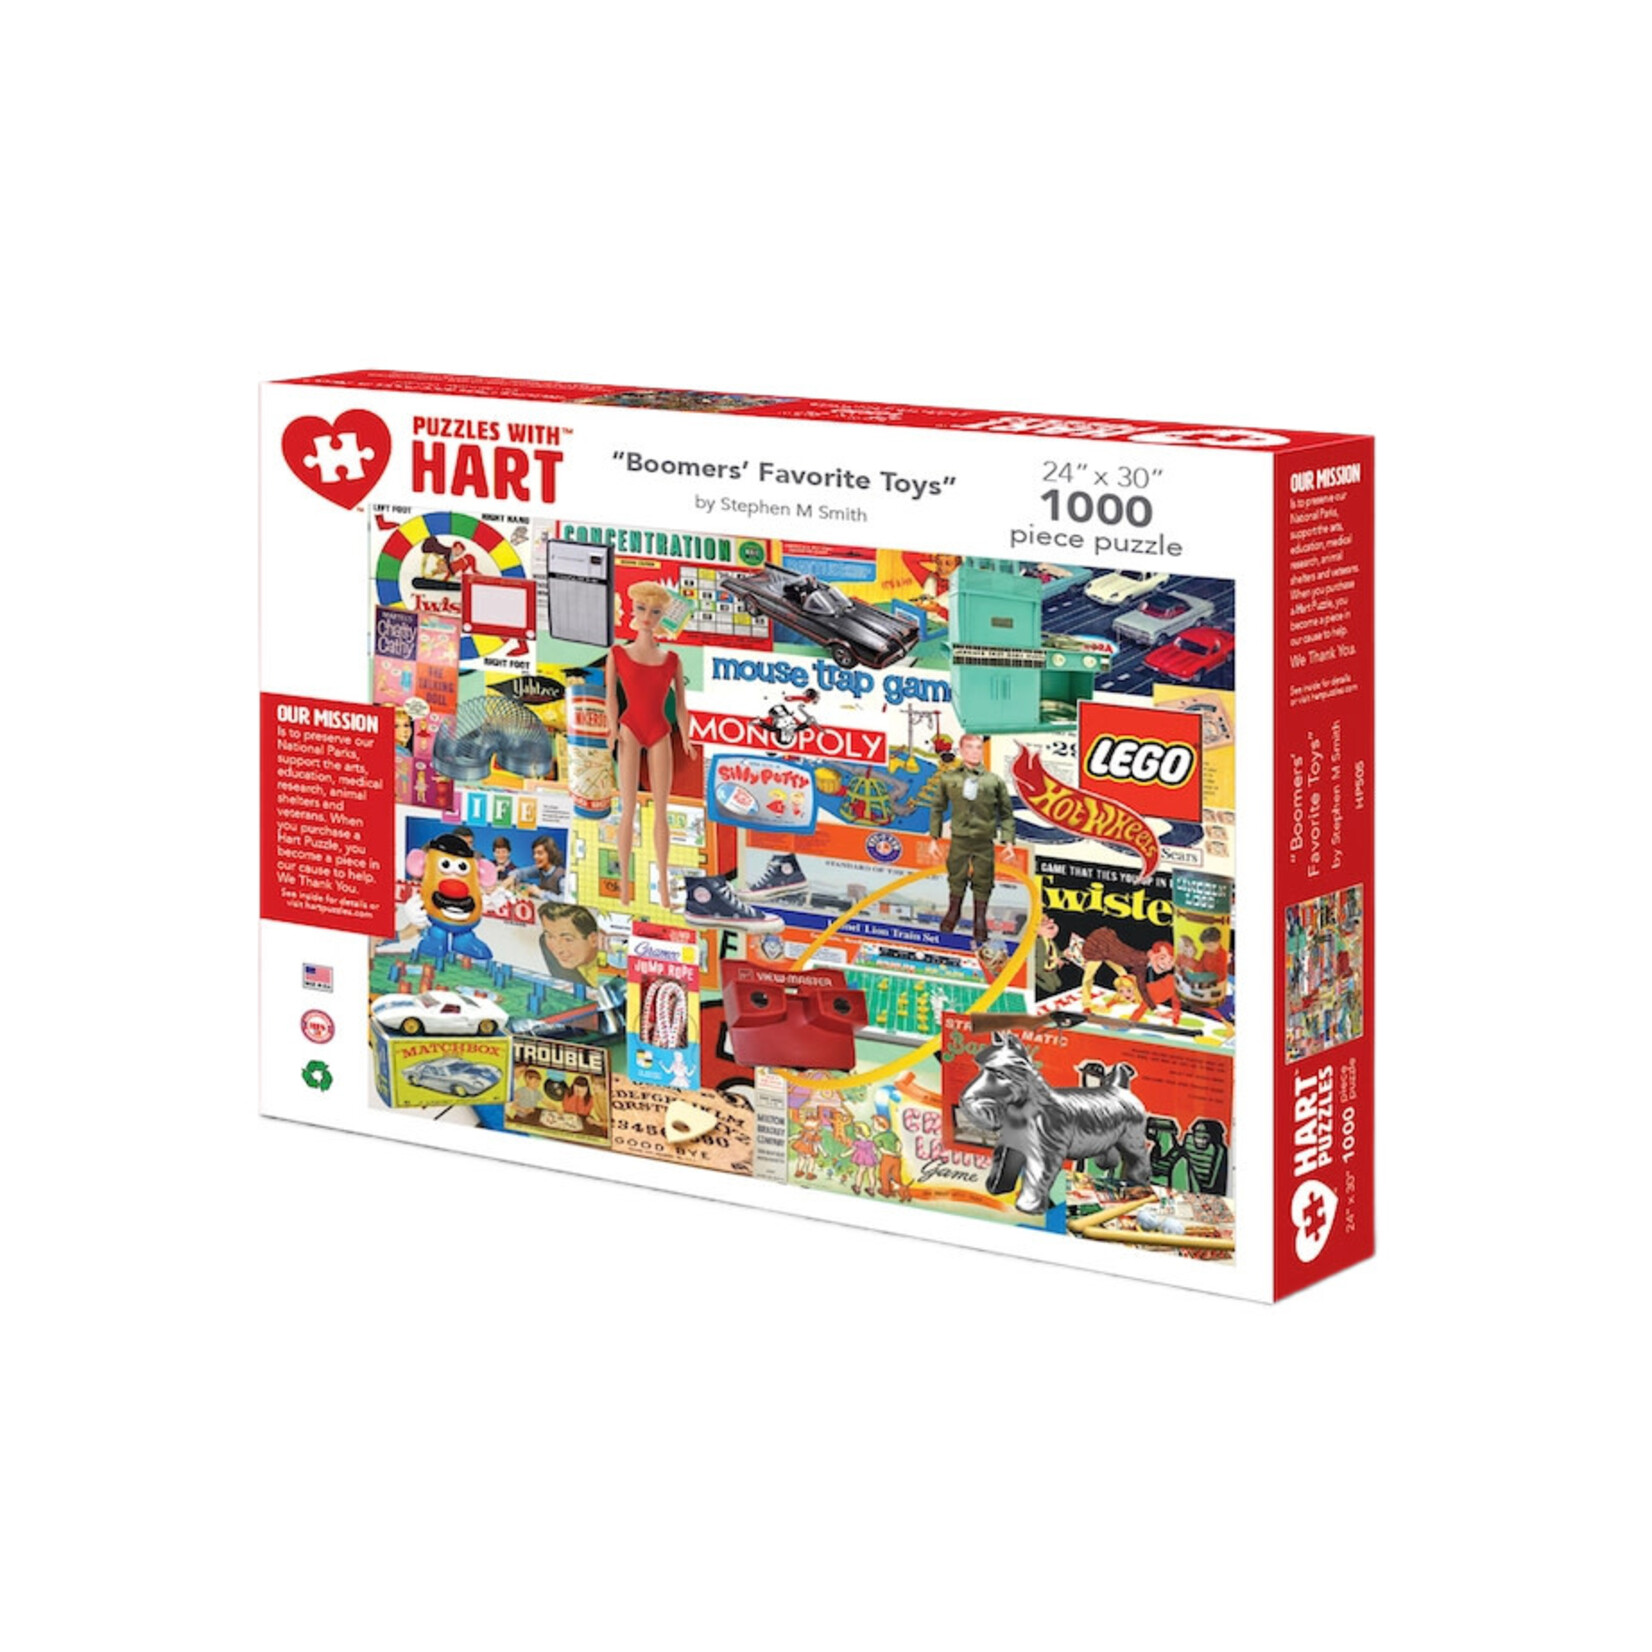 Hart Puzzles Boomers' Favorite Toys Jigsaw Puzzle